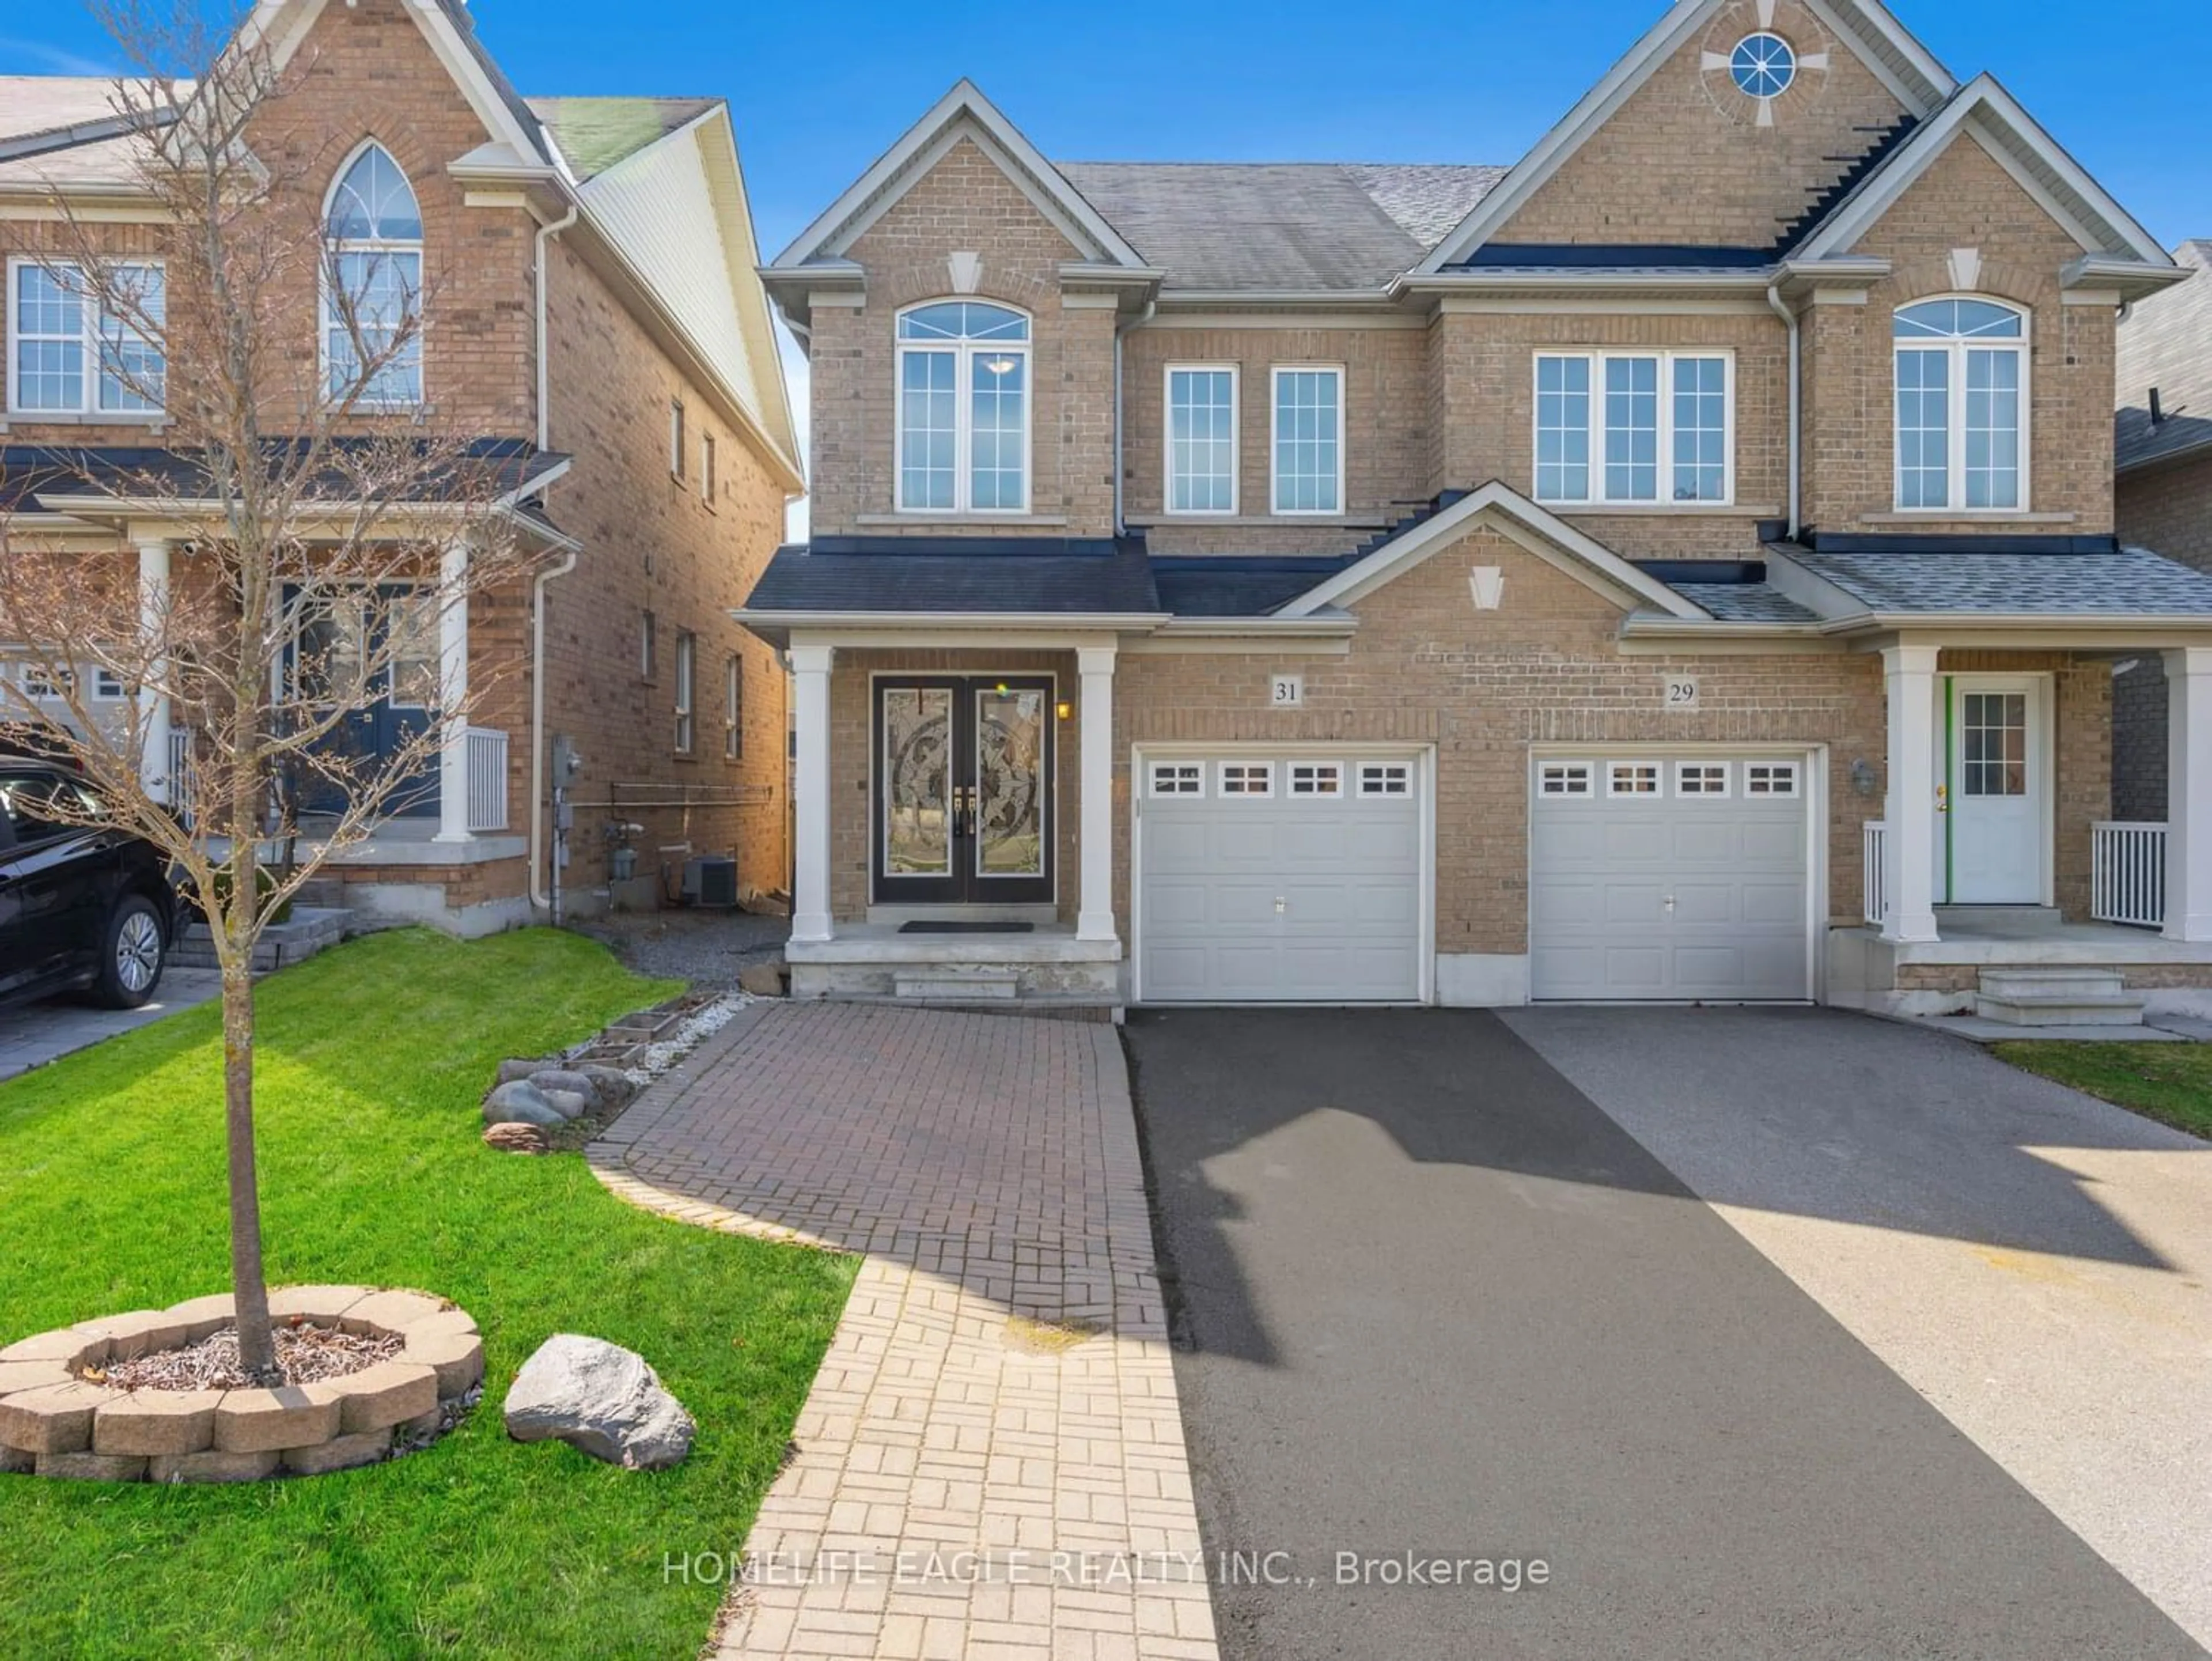 Home with brick exterior material for 31 Harvest Hills Blvd, East Gwillimbury Ontario L9N 0A6